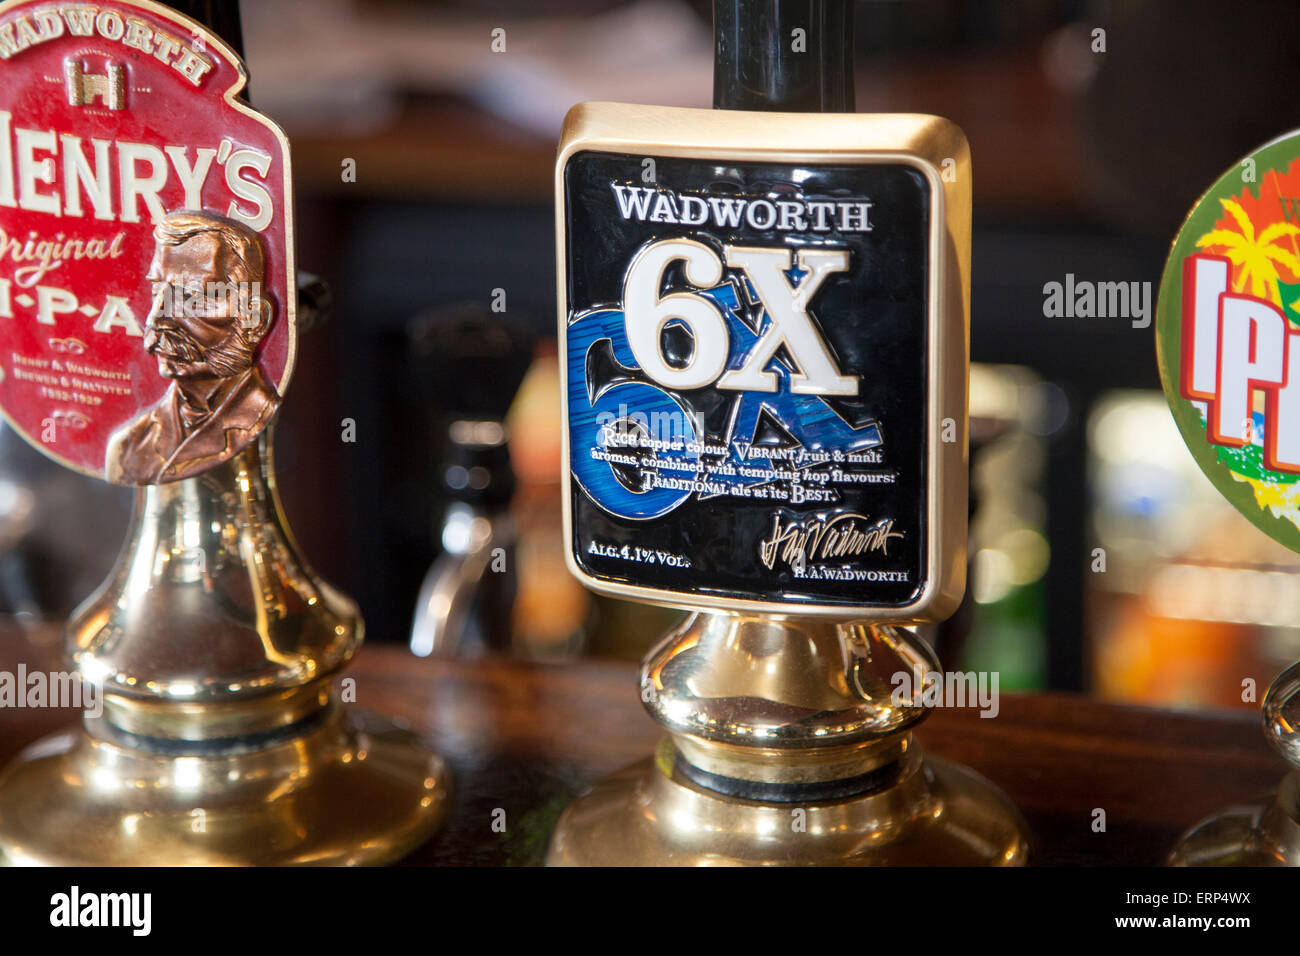 Pub hand pumps for Wadworth 6X real ale beer, Devizes, Wiltshire, England, UK Stock Photo